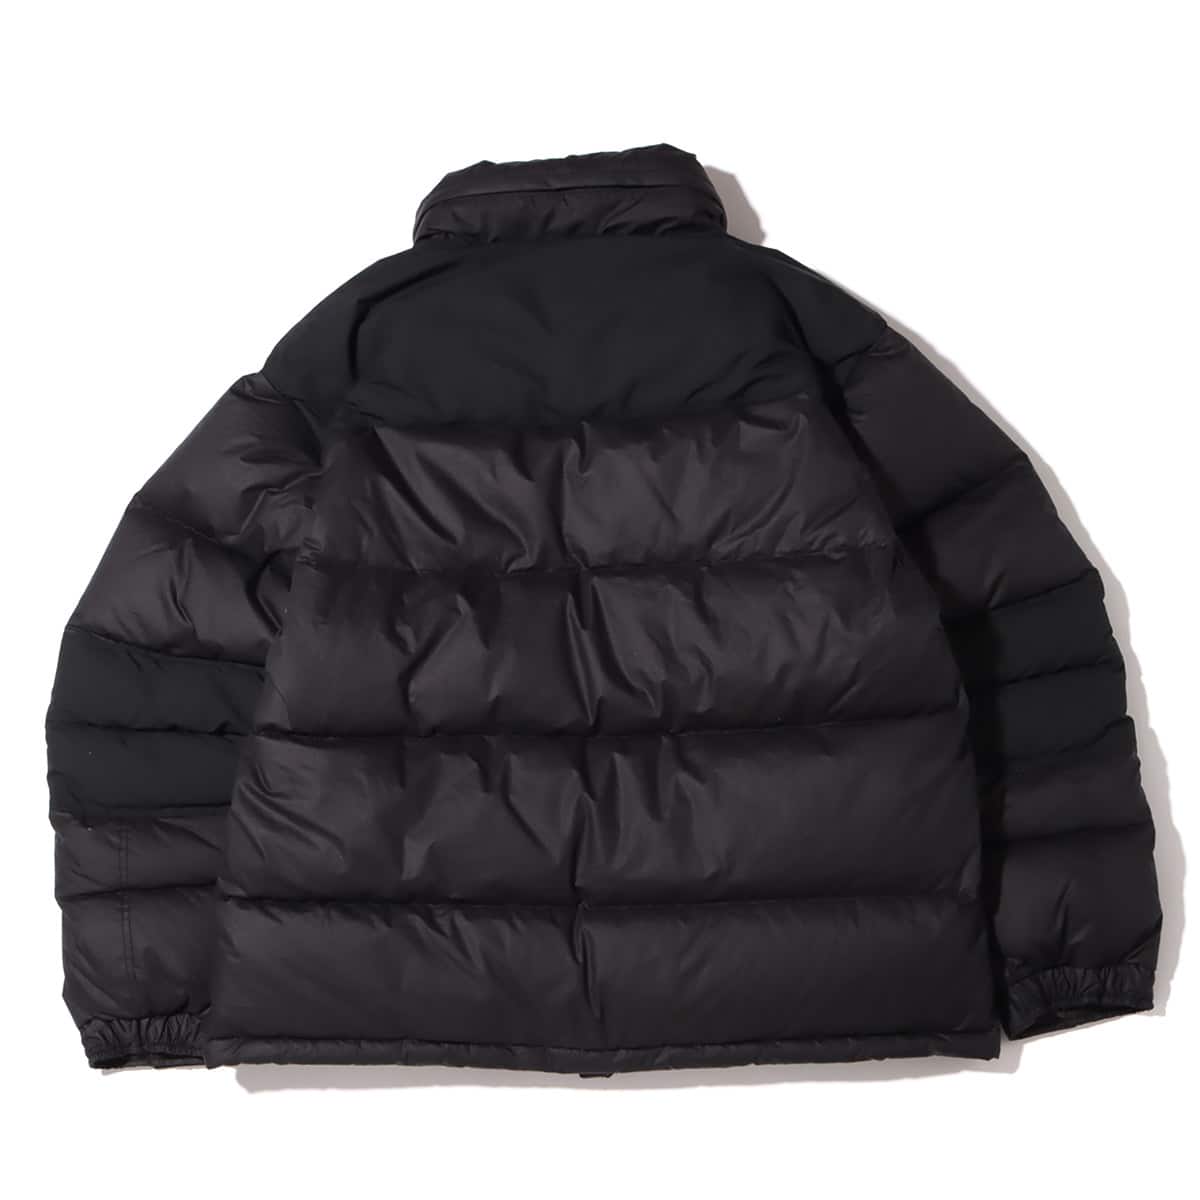 THE NORTH FACE PURPLE LABEL Field Down Jacket Black 21FW-I